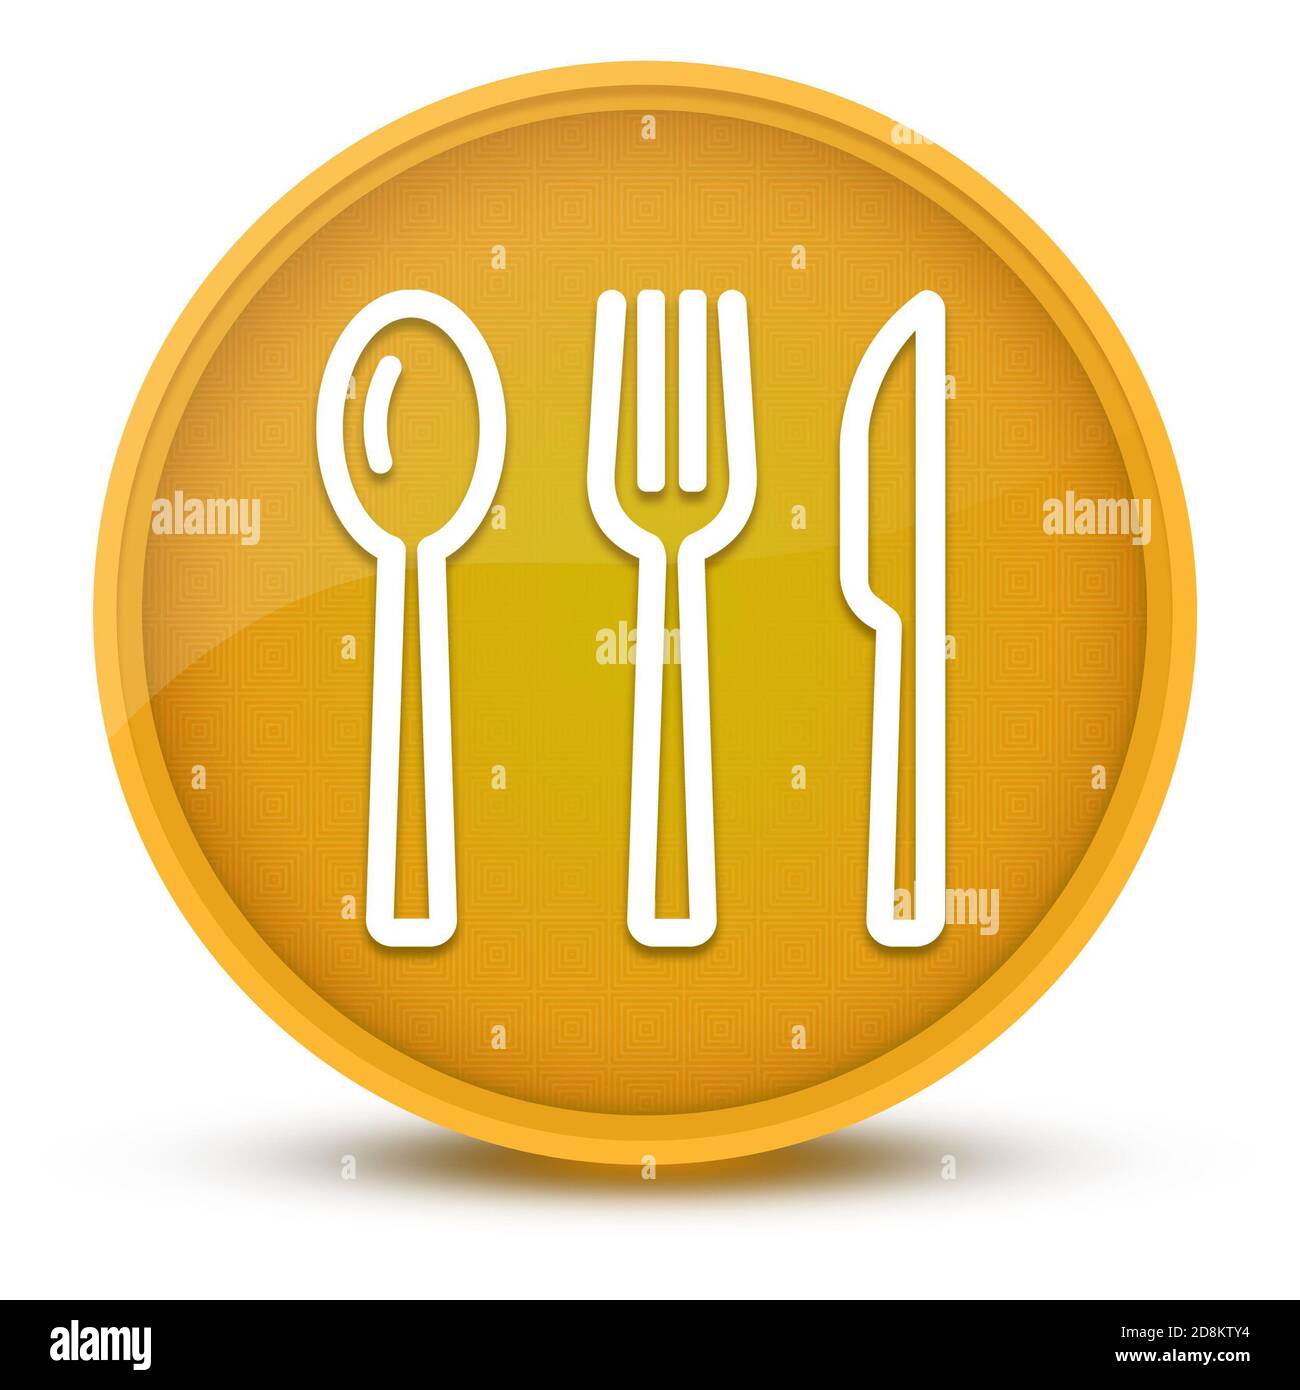 Cutlery luxurious glossy yellow round button abstract illustration Stock Photo